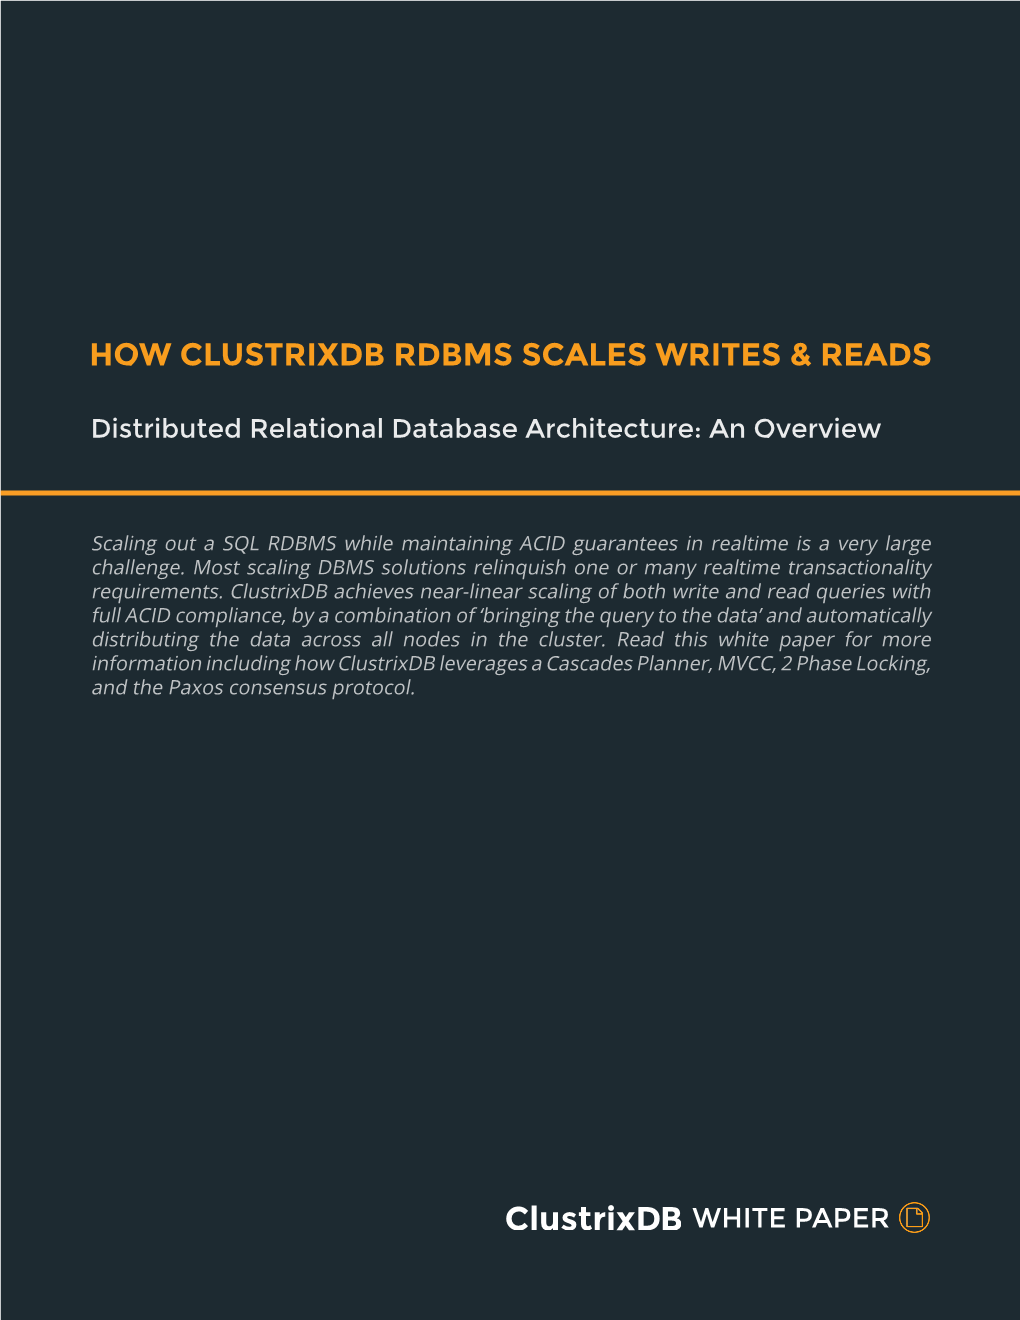 How Clustrixdb RDBMS Scales Writes and Reads